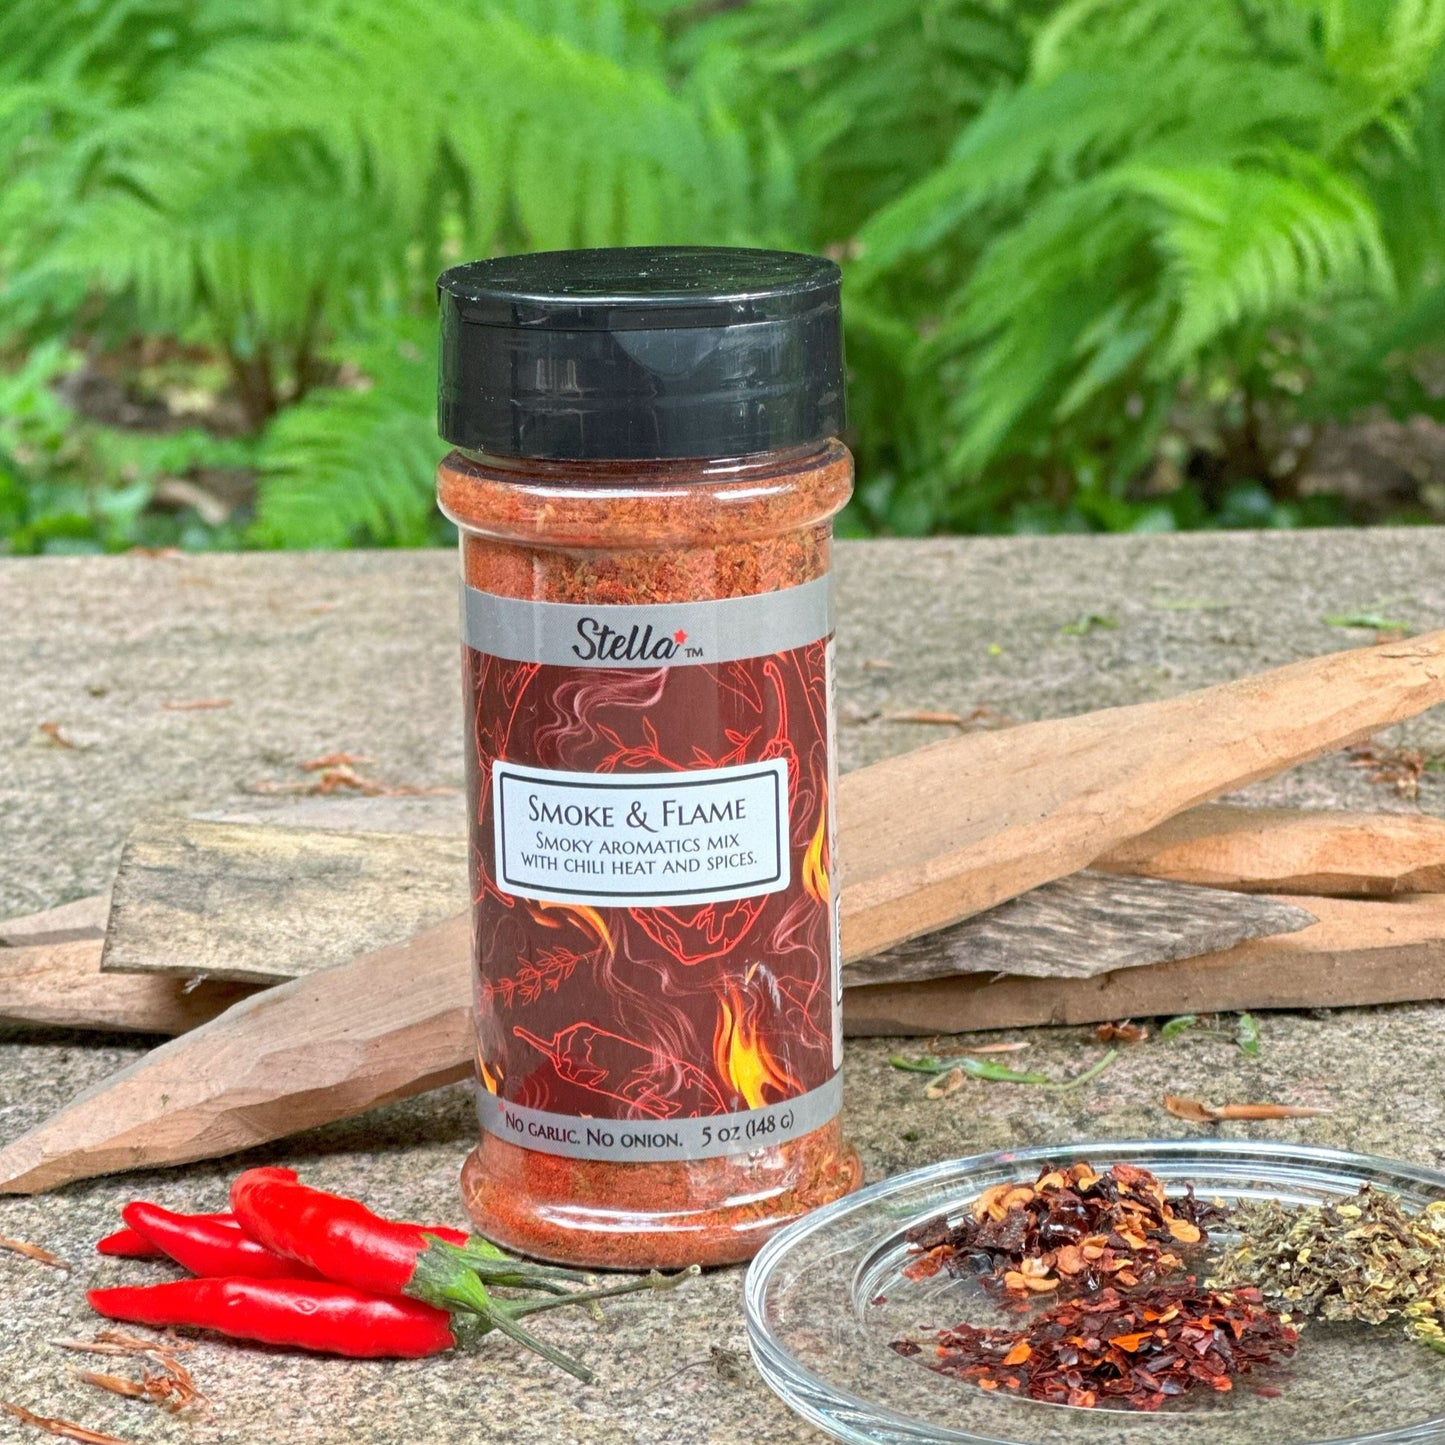 Hickory smoke, aleppo, pequin and chipotle peppers and herbs packs a powerful flavor experience.  Try on meat, potatoes, in chili and stews for increased flavor, use as a  rub or in marinades. Add a pinch to popcorn and french fries for some adventurous heat.